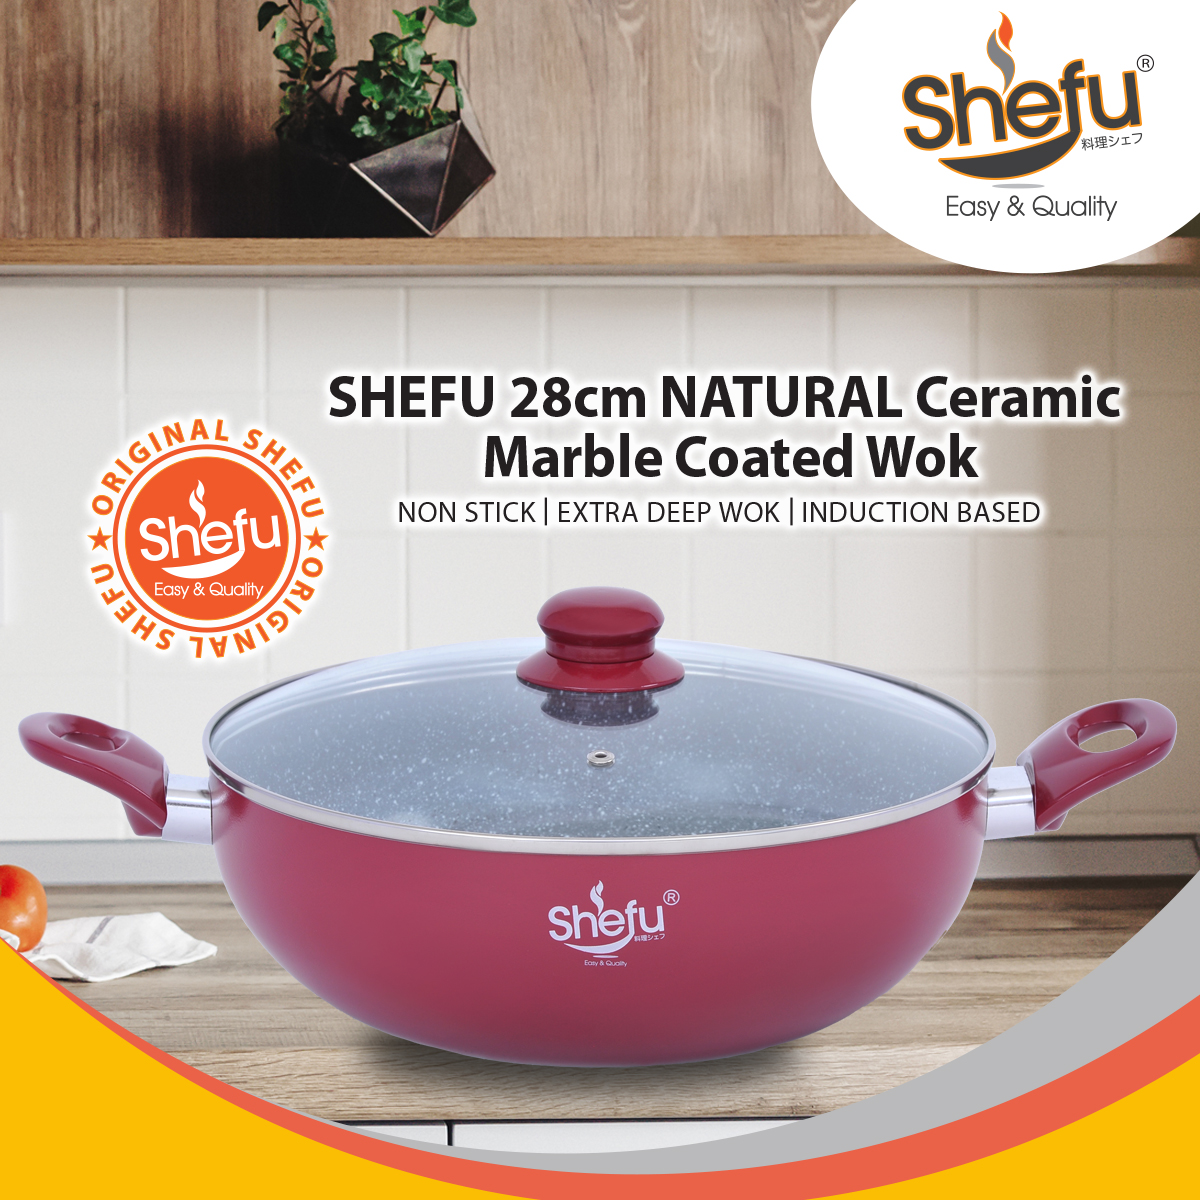 SHEFU 28cm NATURAL ECO NON STICK Ceramic Marble Coated Wok with double handles